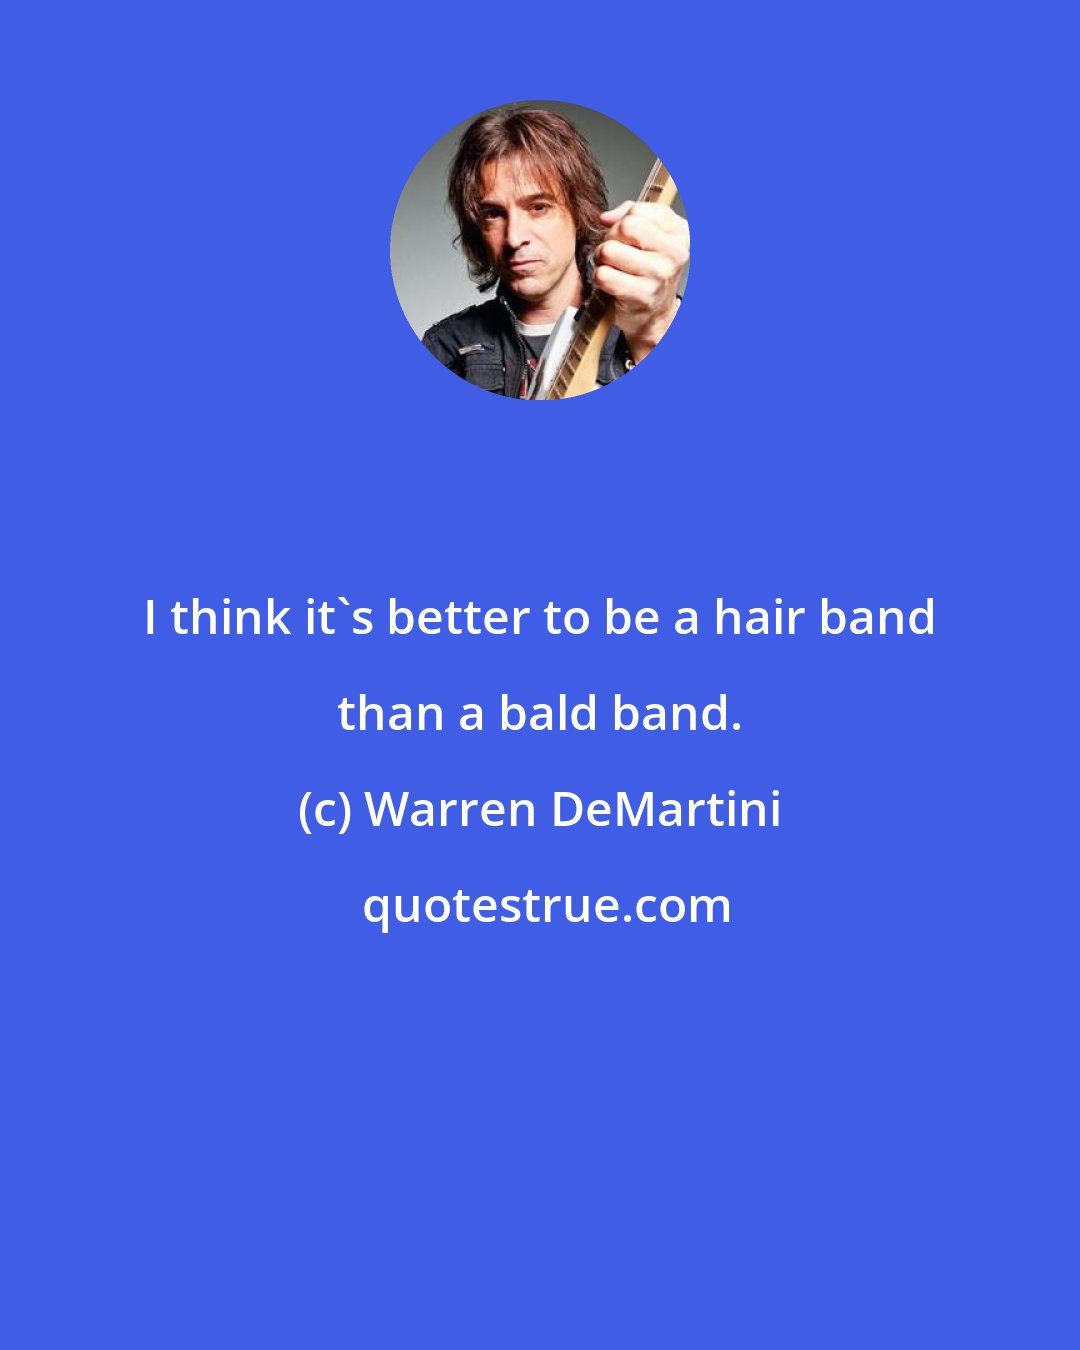 Warren DeMartini: I think it's better to be a hair band than a bald band.